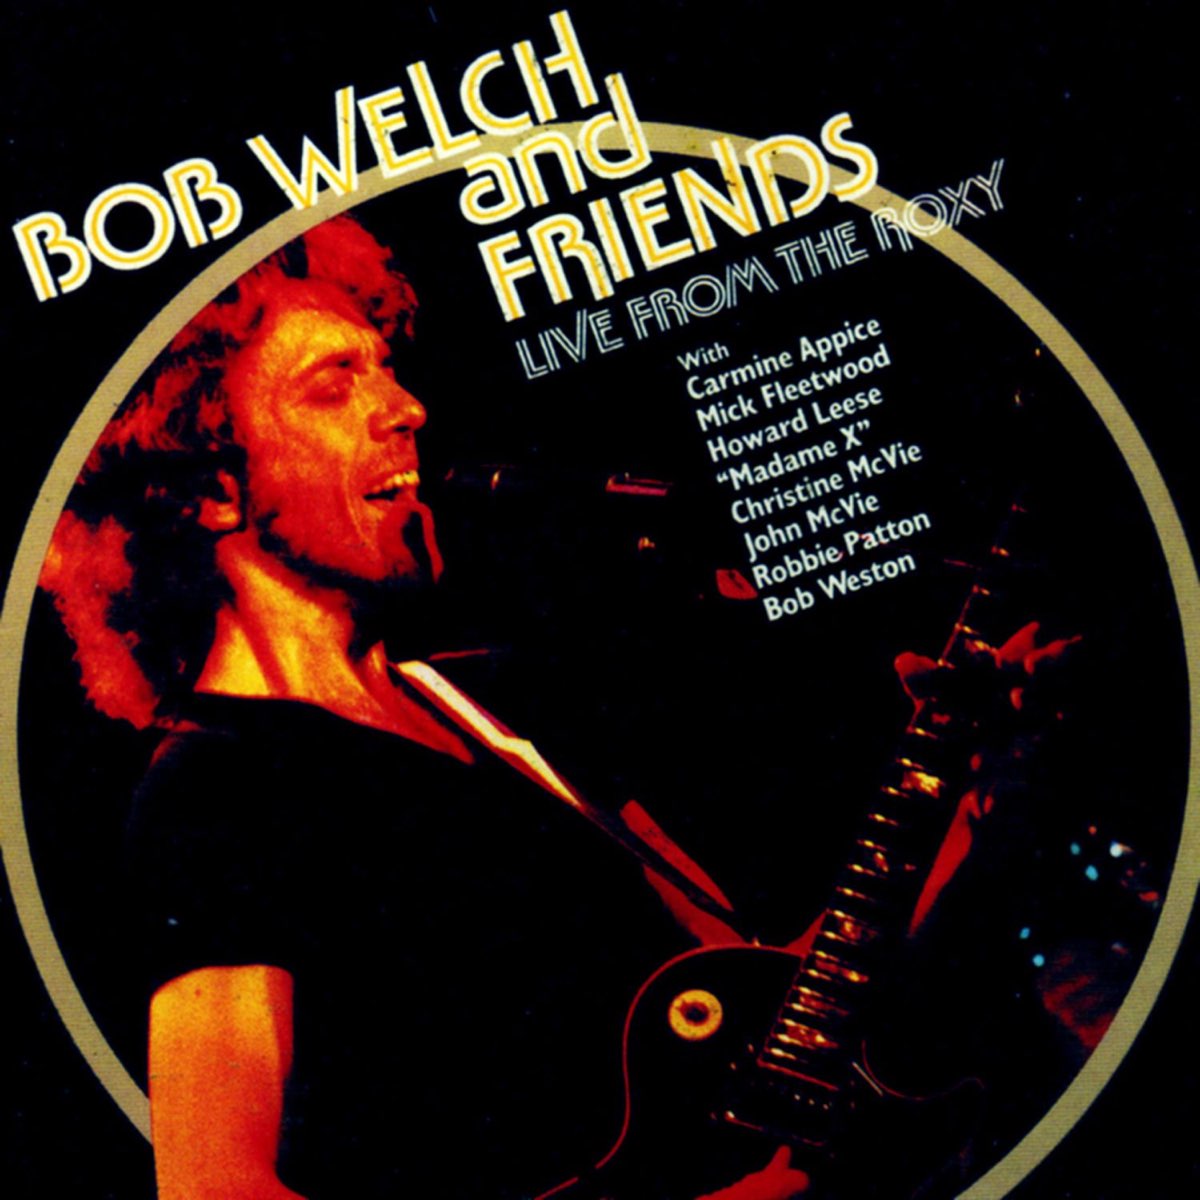 ‎Bob Welch With Friends (Live from the Roxy) - ボブ・ウェルチの